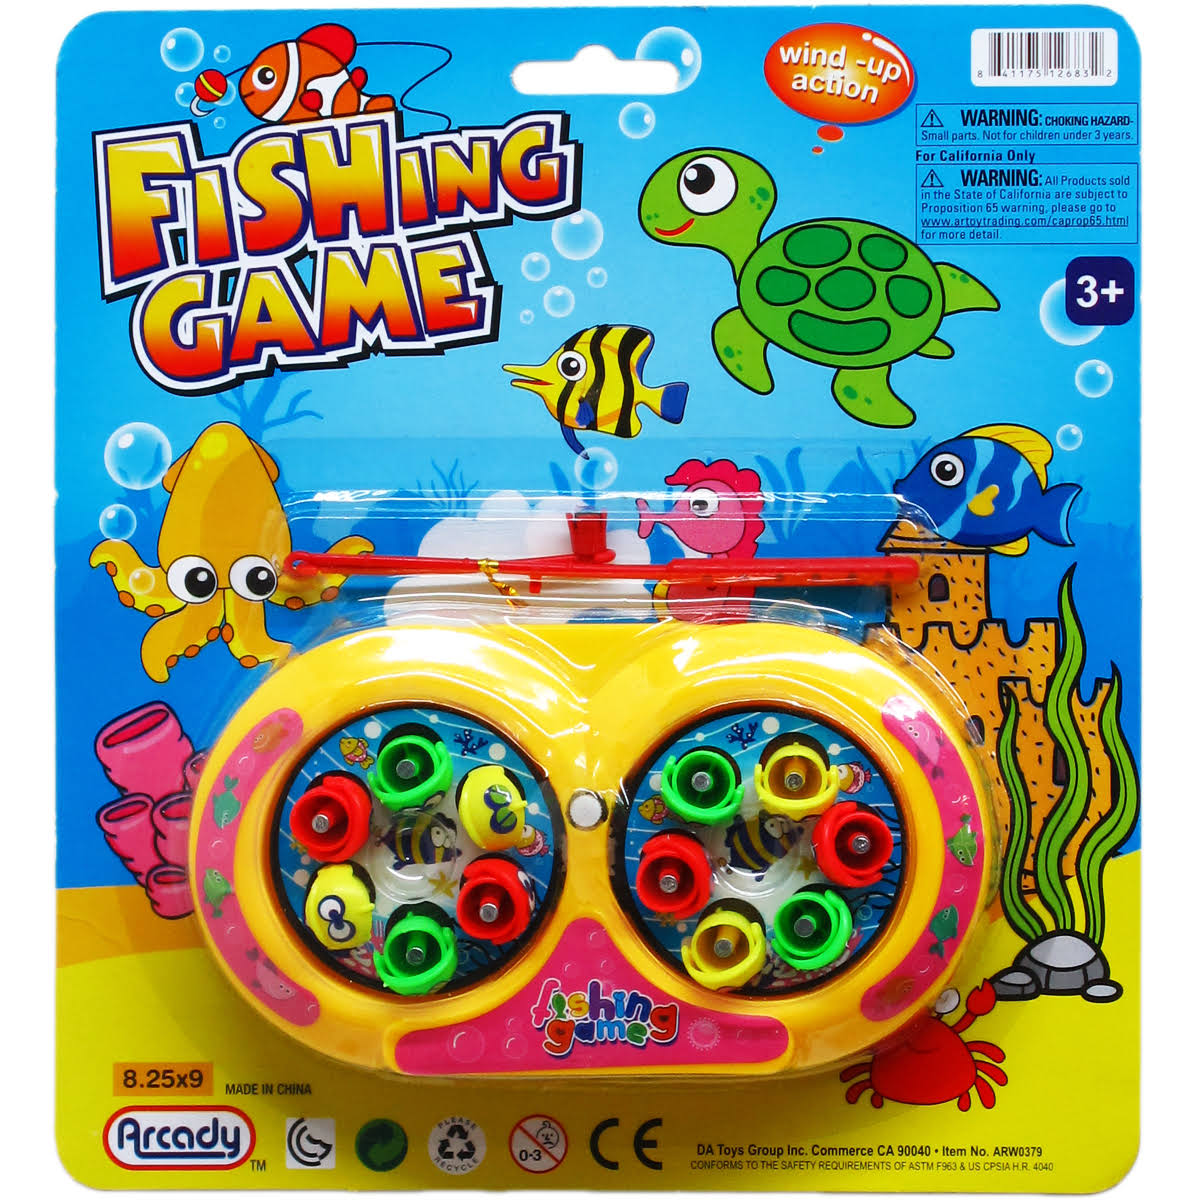 Ddi 2339734 Two Player Wind Up Action Fishing Game - Case Of 48 Ddi Multicolor